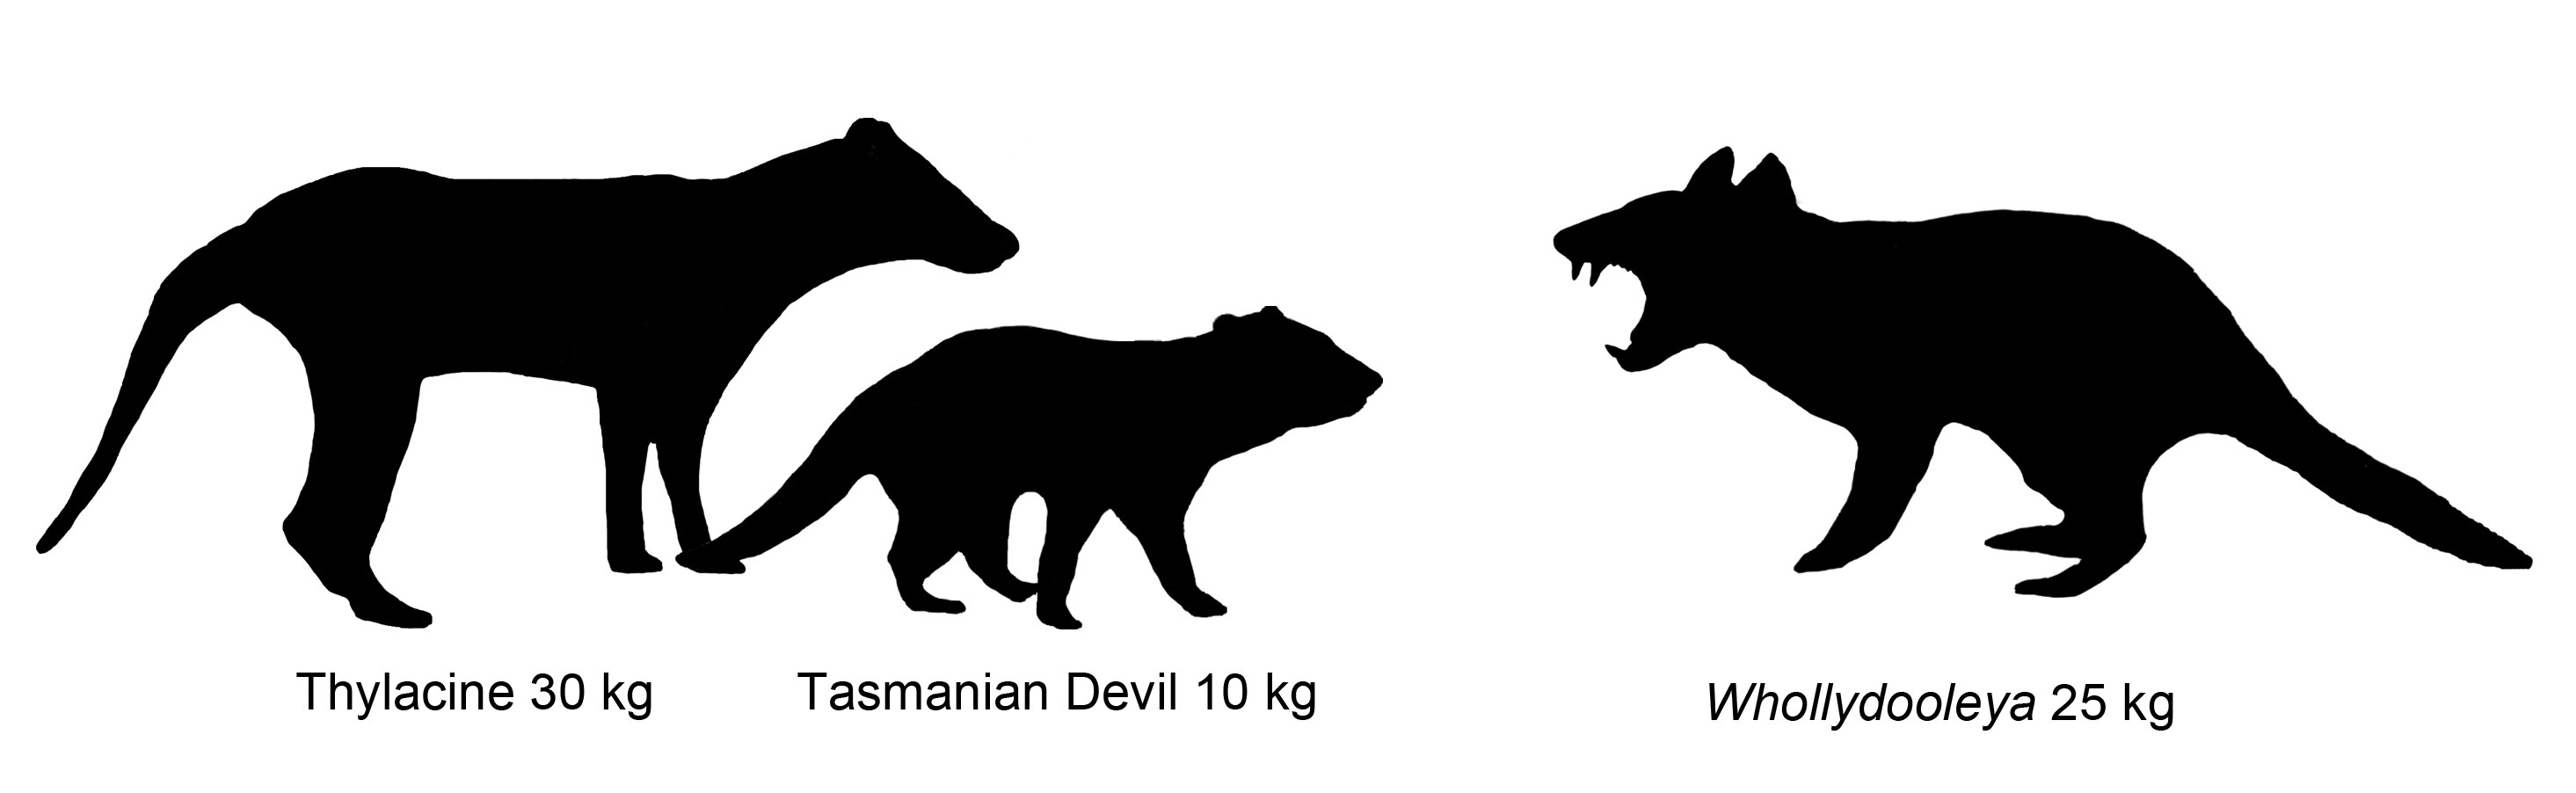 The outlines of three animals.